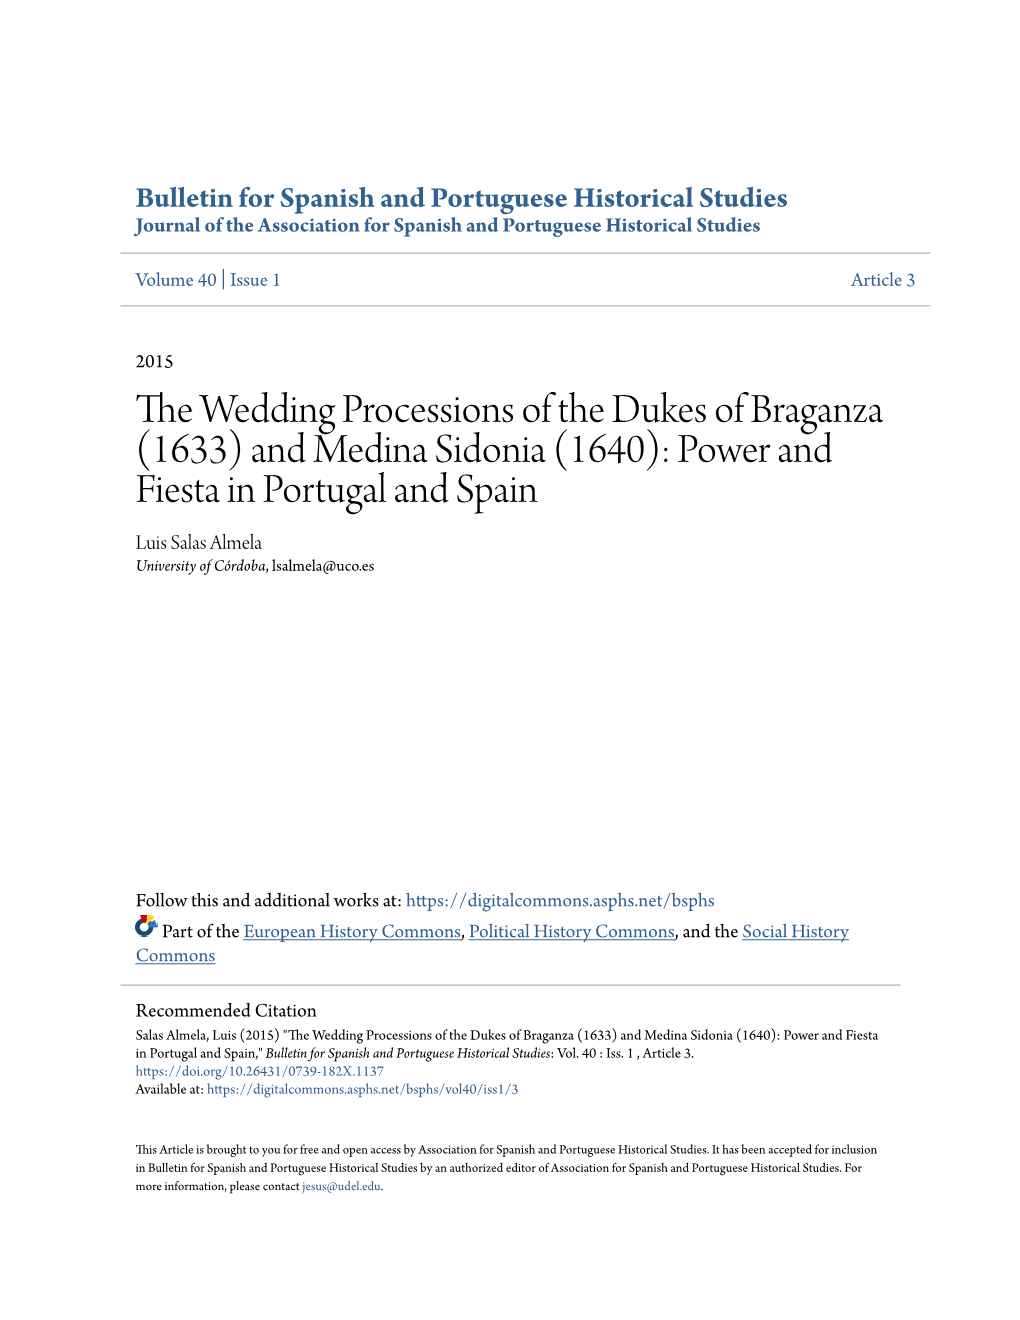 The Wedding Processions of the Dukes of Braganza (1633) and Medina Sidonia (1640): Power and Fiesta in Portugal and Spain